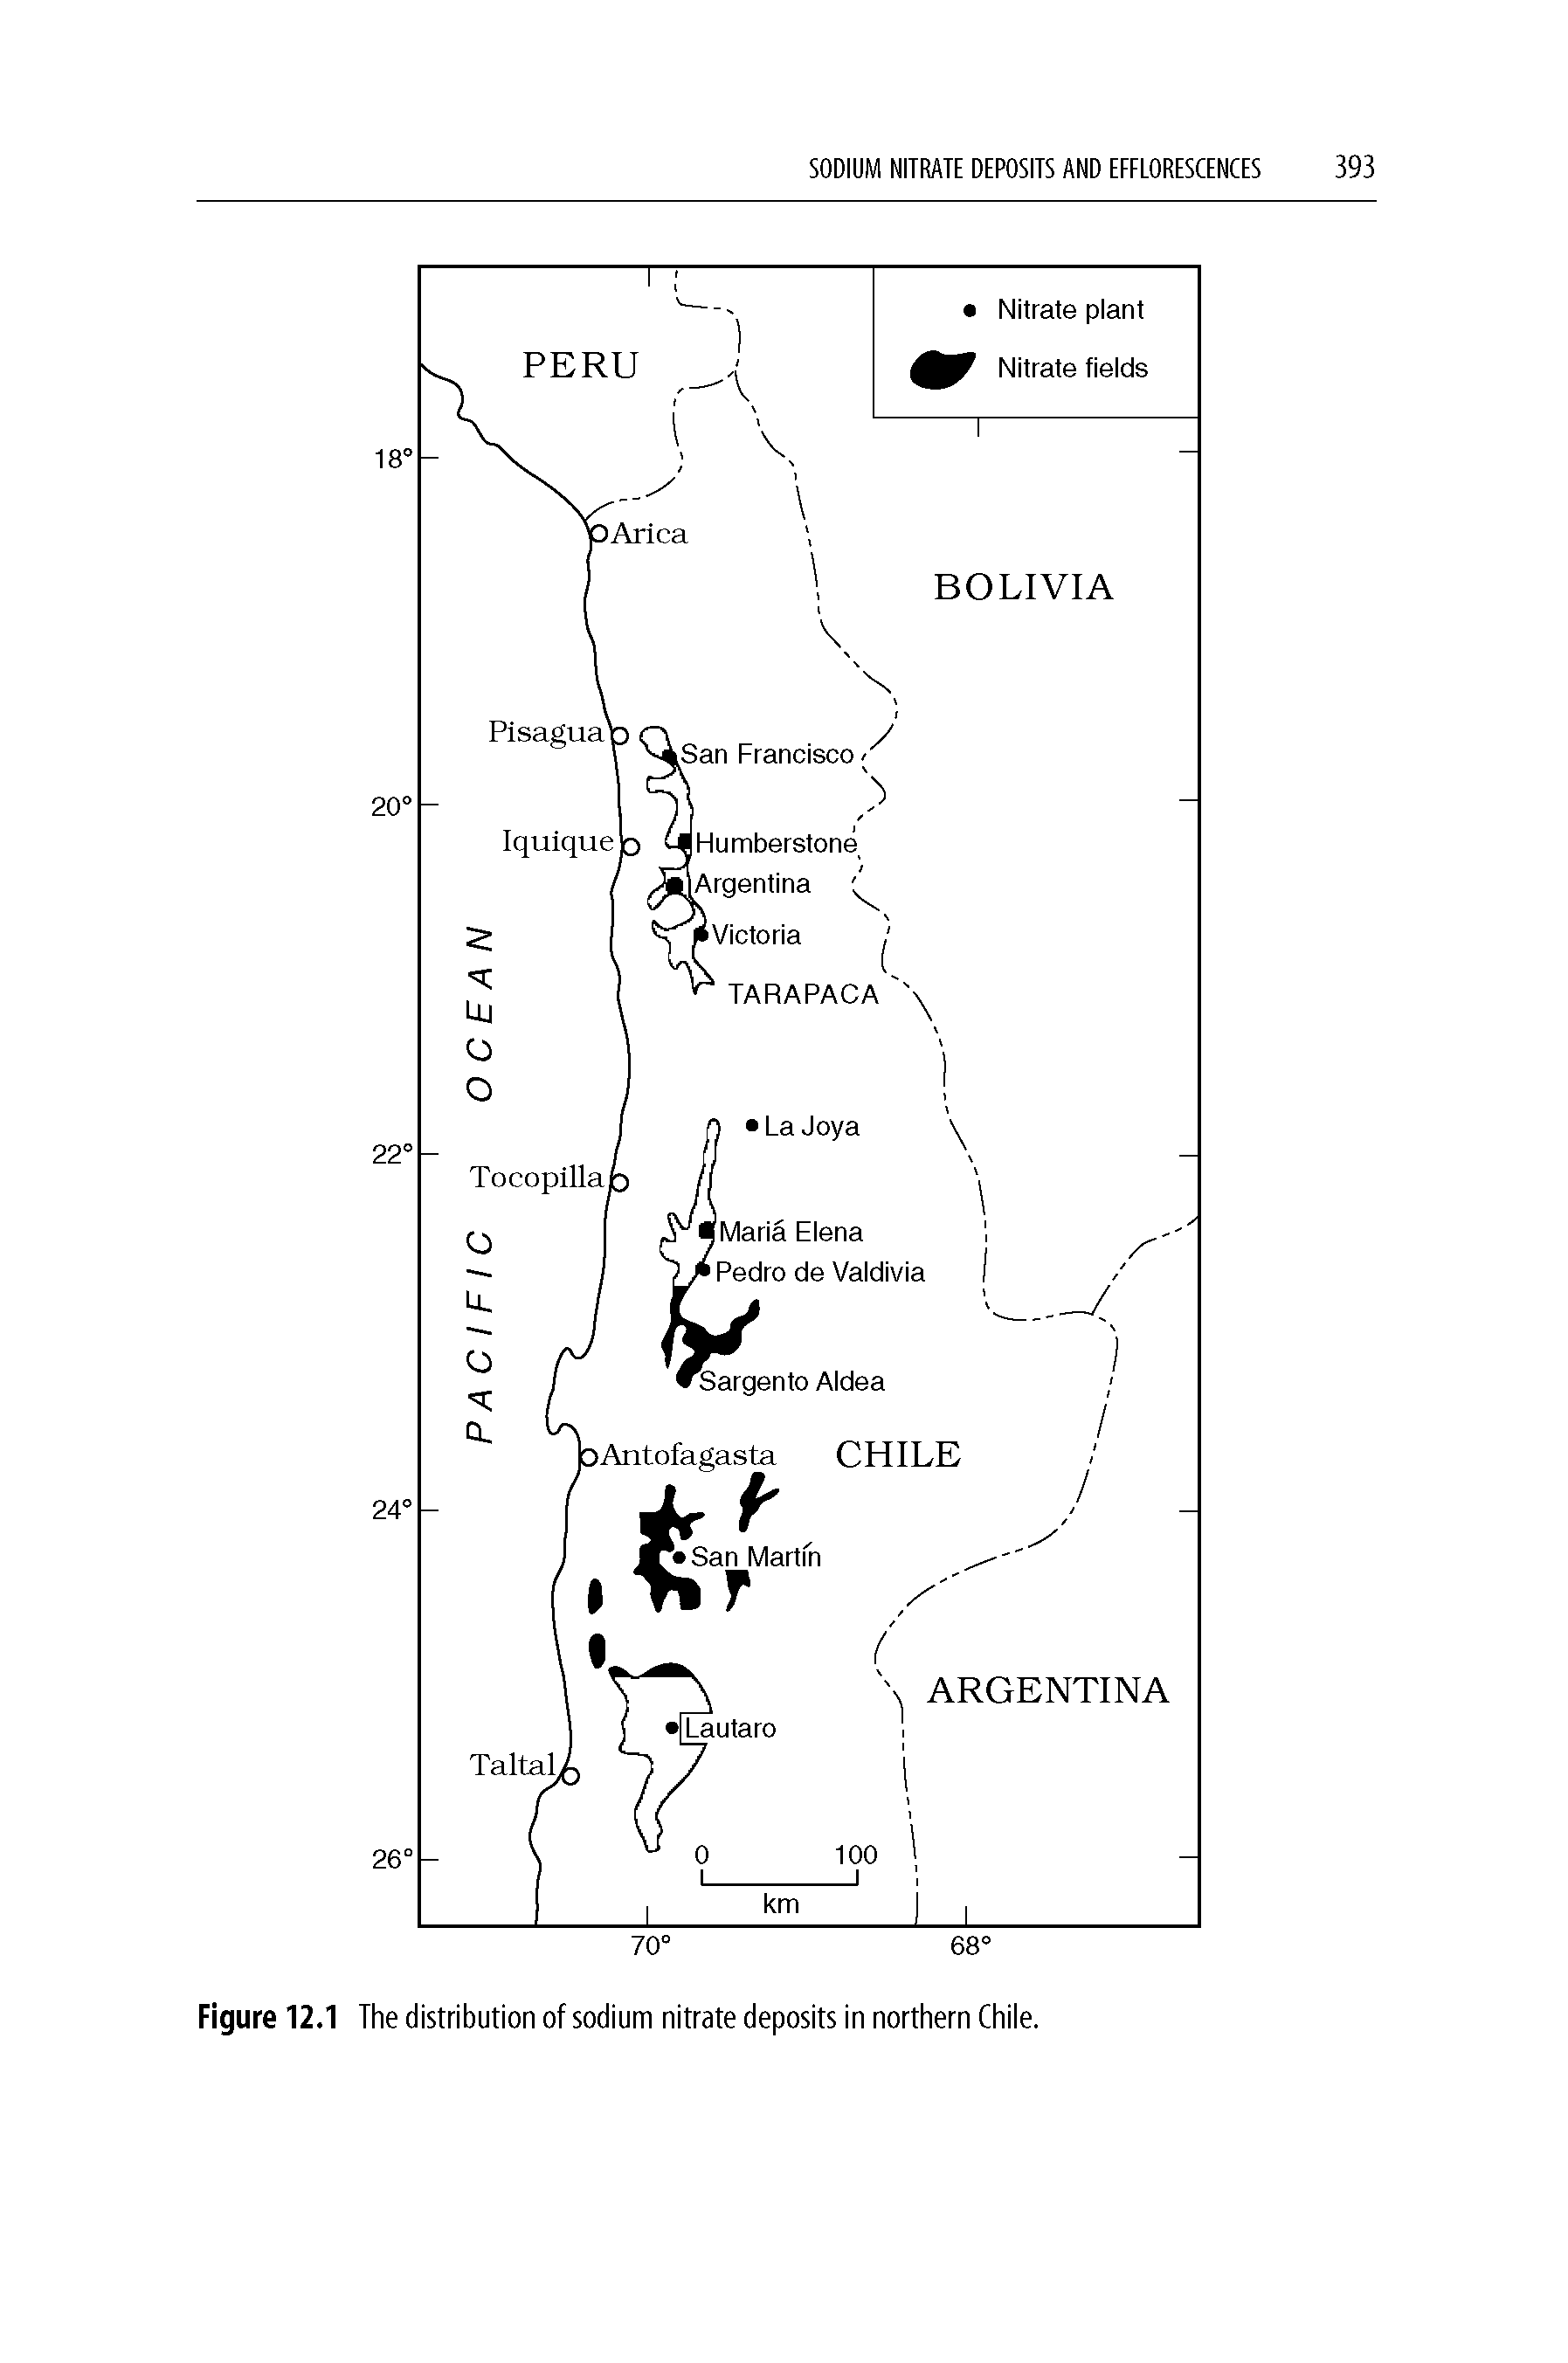 Figure 12.1 The distribution of sodium nitrate deposits in northern Chile.